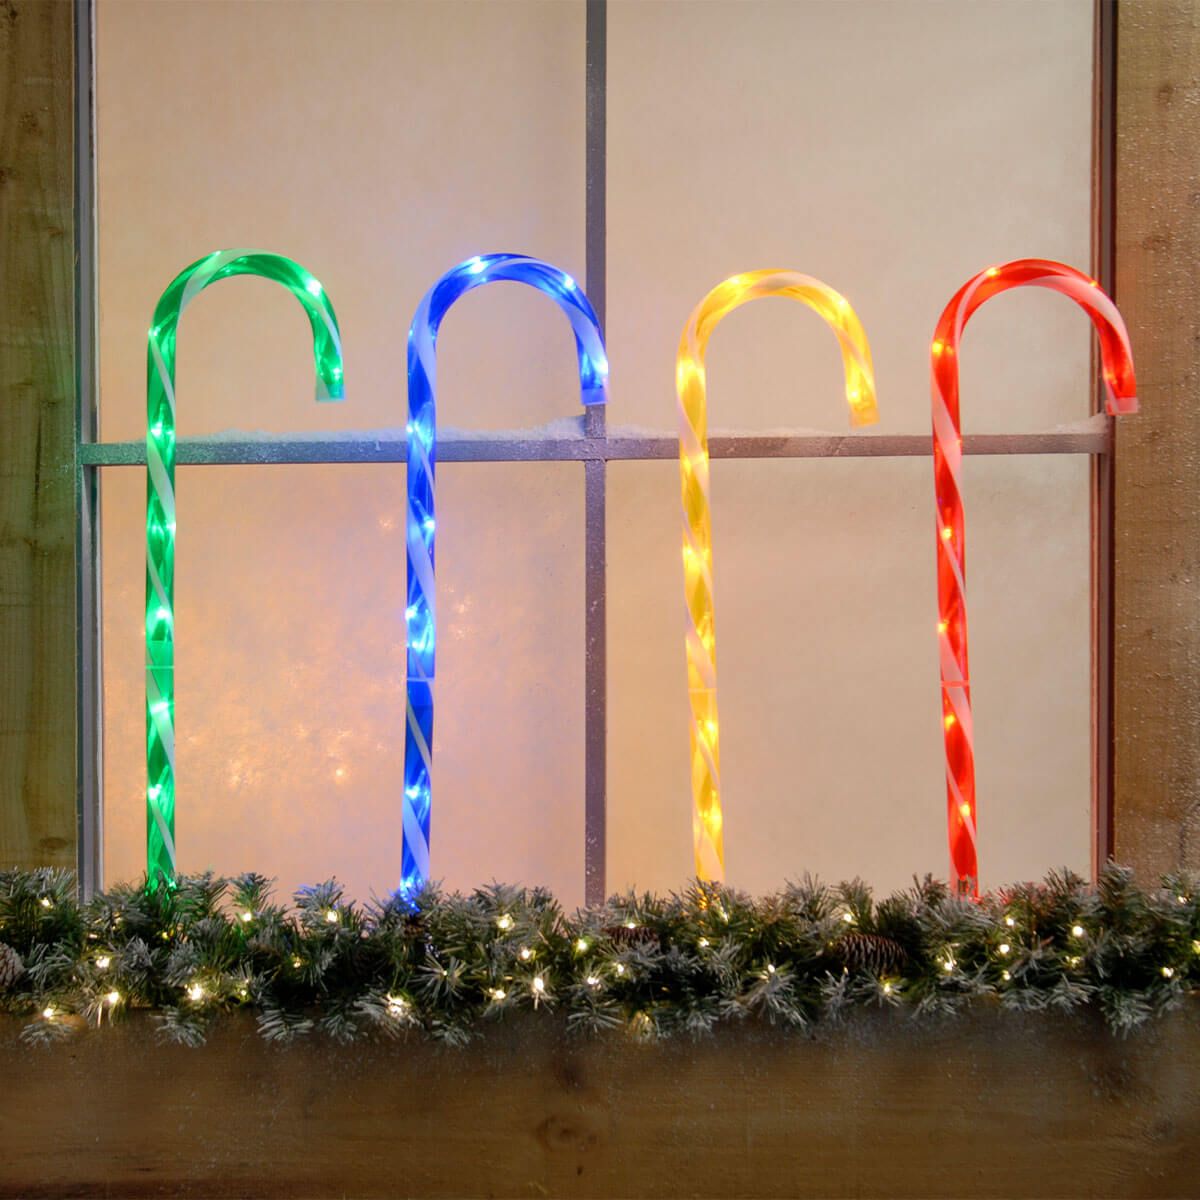 Set of 4 Multi-Coloured Candy Cane Stake Lights - Ruxley Manor